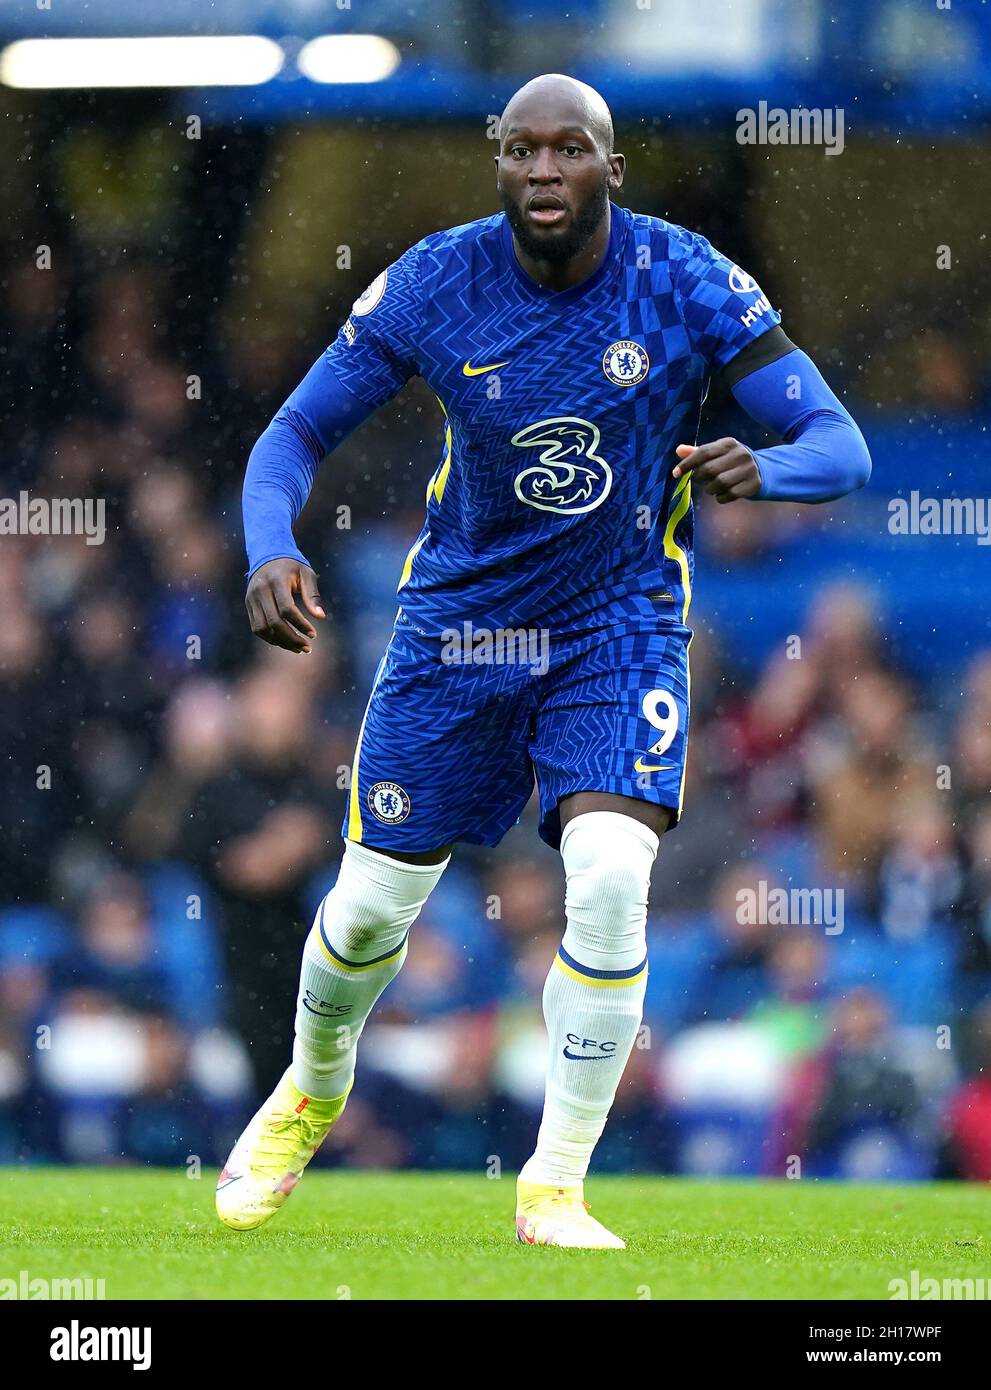 File photo dated 02-10-2021 of Chelsea's Romelu Lukaku in action during the Premier League match at Stamford Bridge, London. Thomas Tuchel has insisted he has no worries over 'unselfish' Romelu Lukaku's six-goal dry spell in front of goal for Chelsea. Issue date: Sunday October 17, 2021. Stock Photo